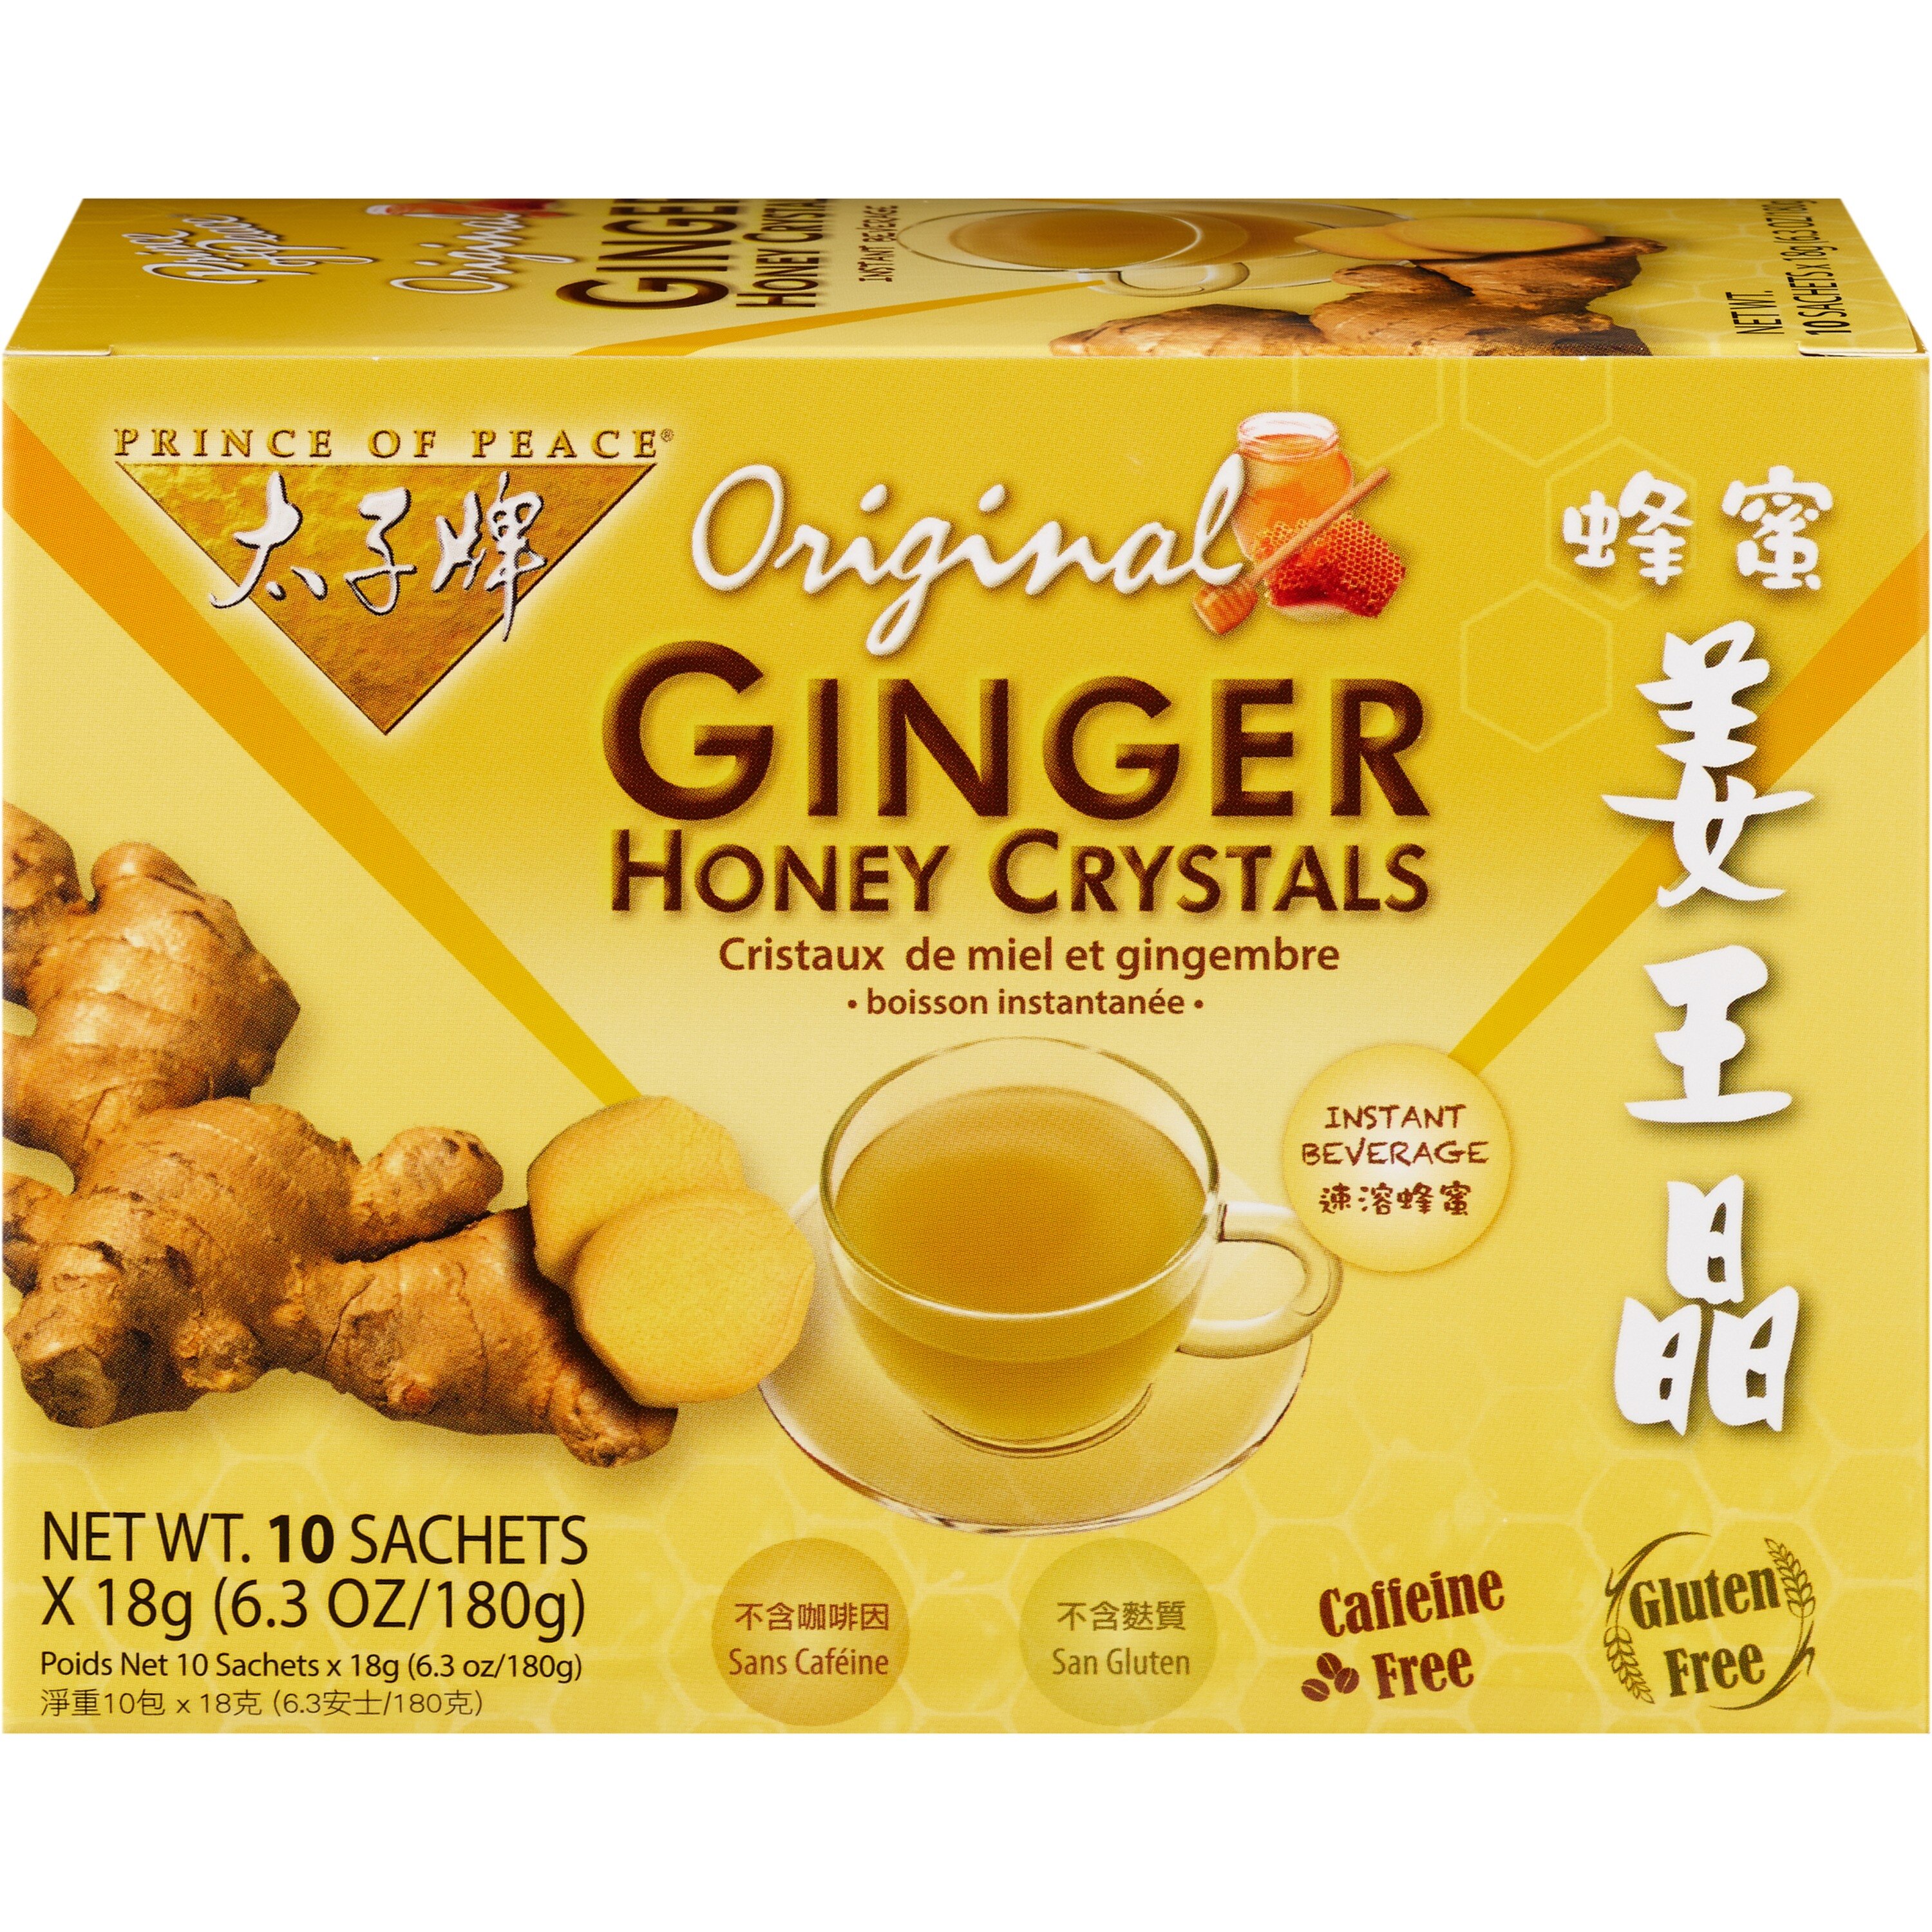 Prince of Peace Ginger Honey Crystals, Original, 10 CT